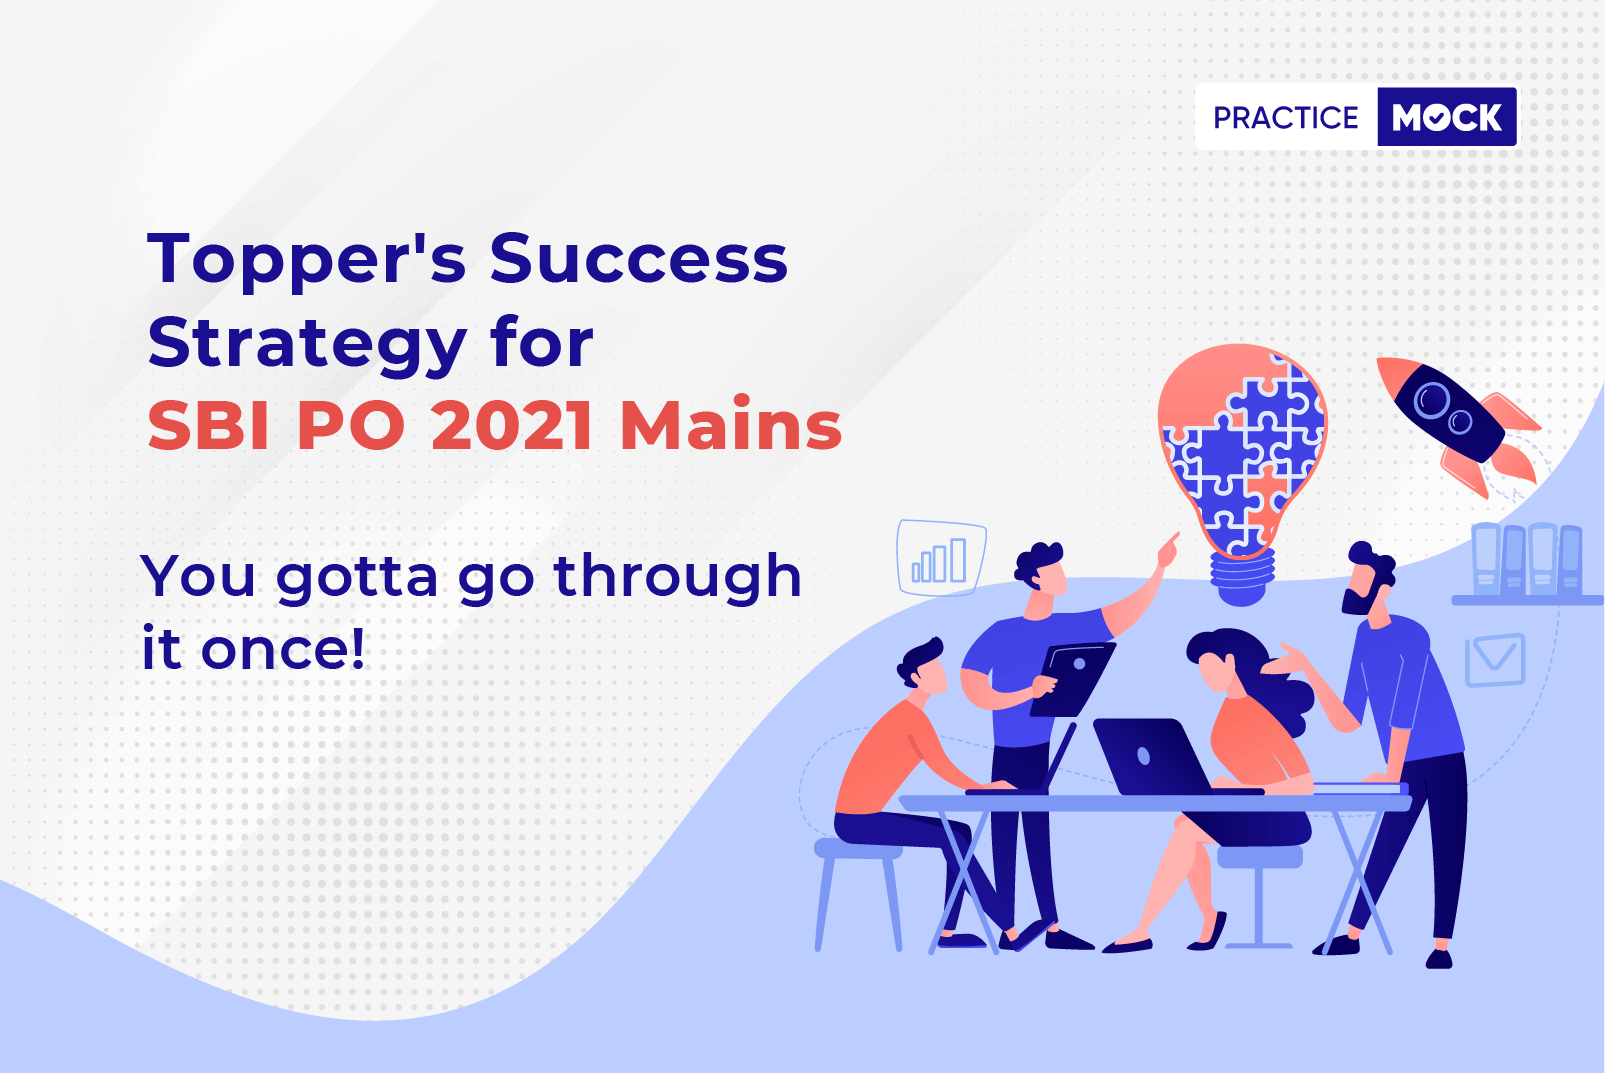 Topper's Success Strategy for SBI PO 2021 Mains